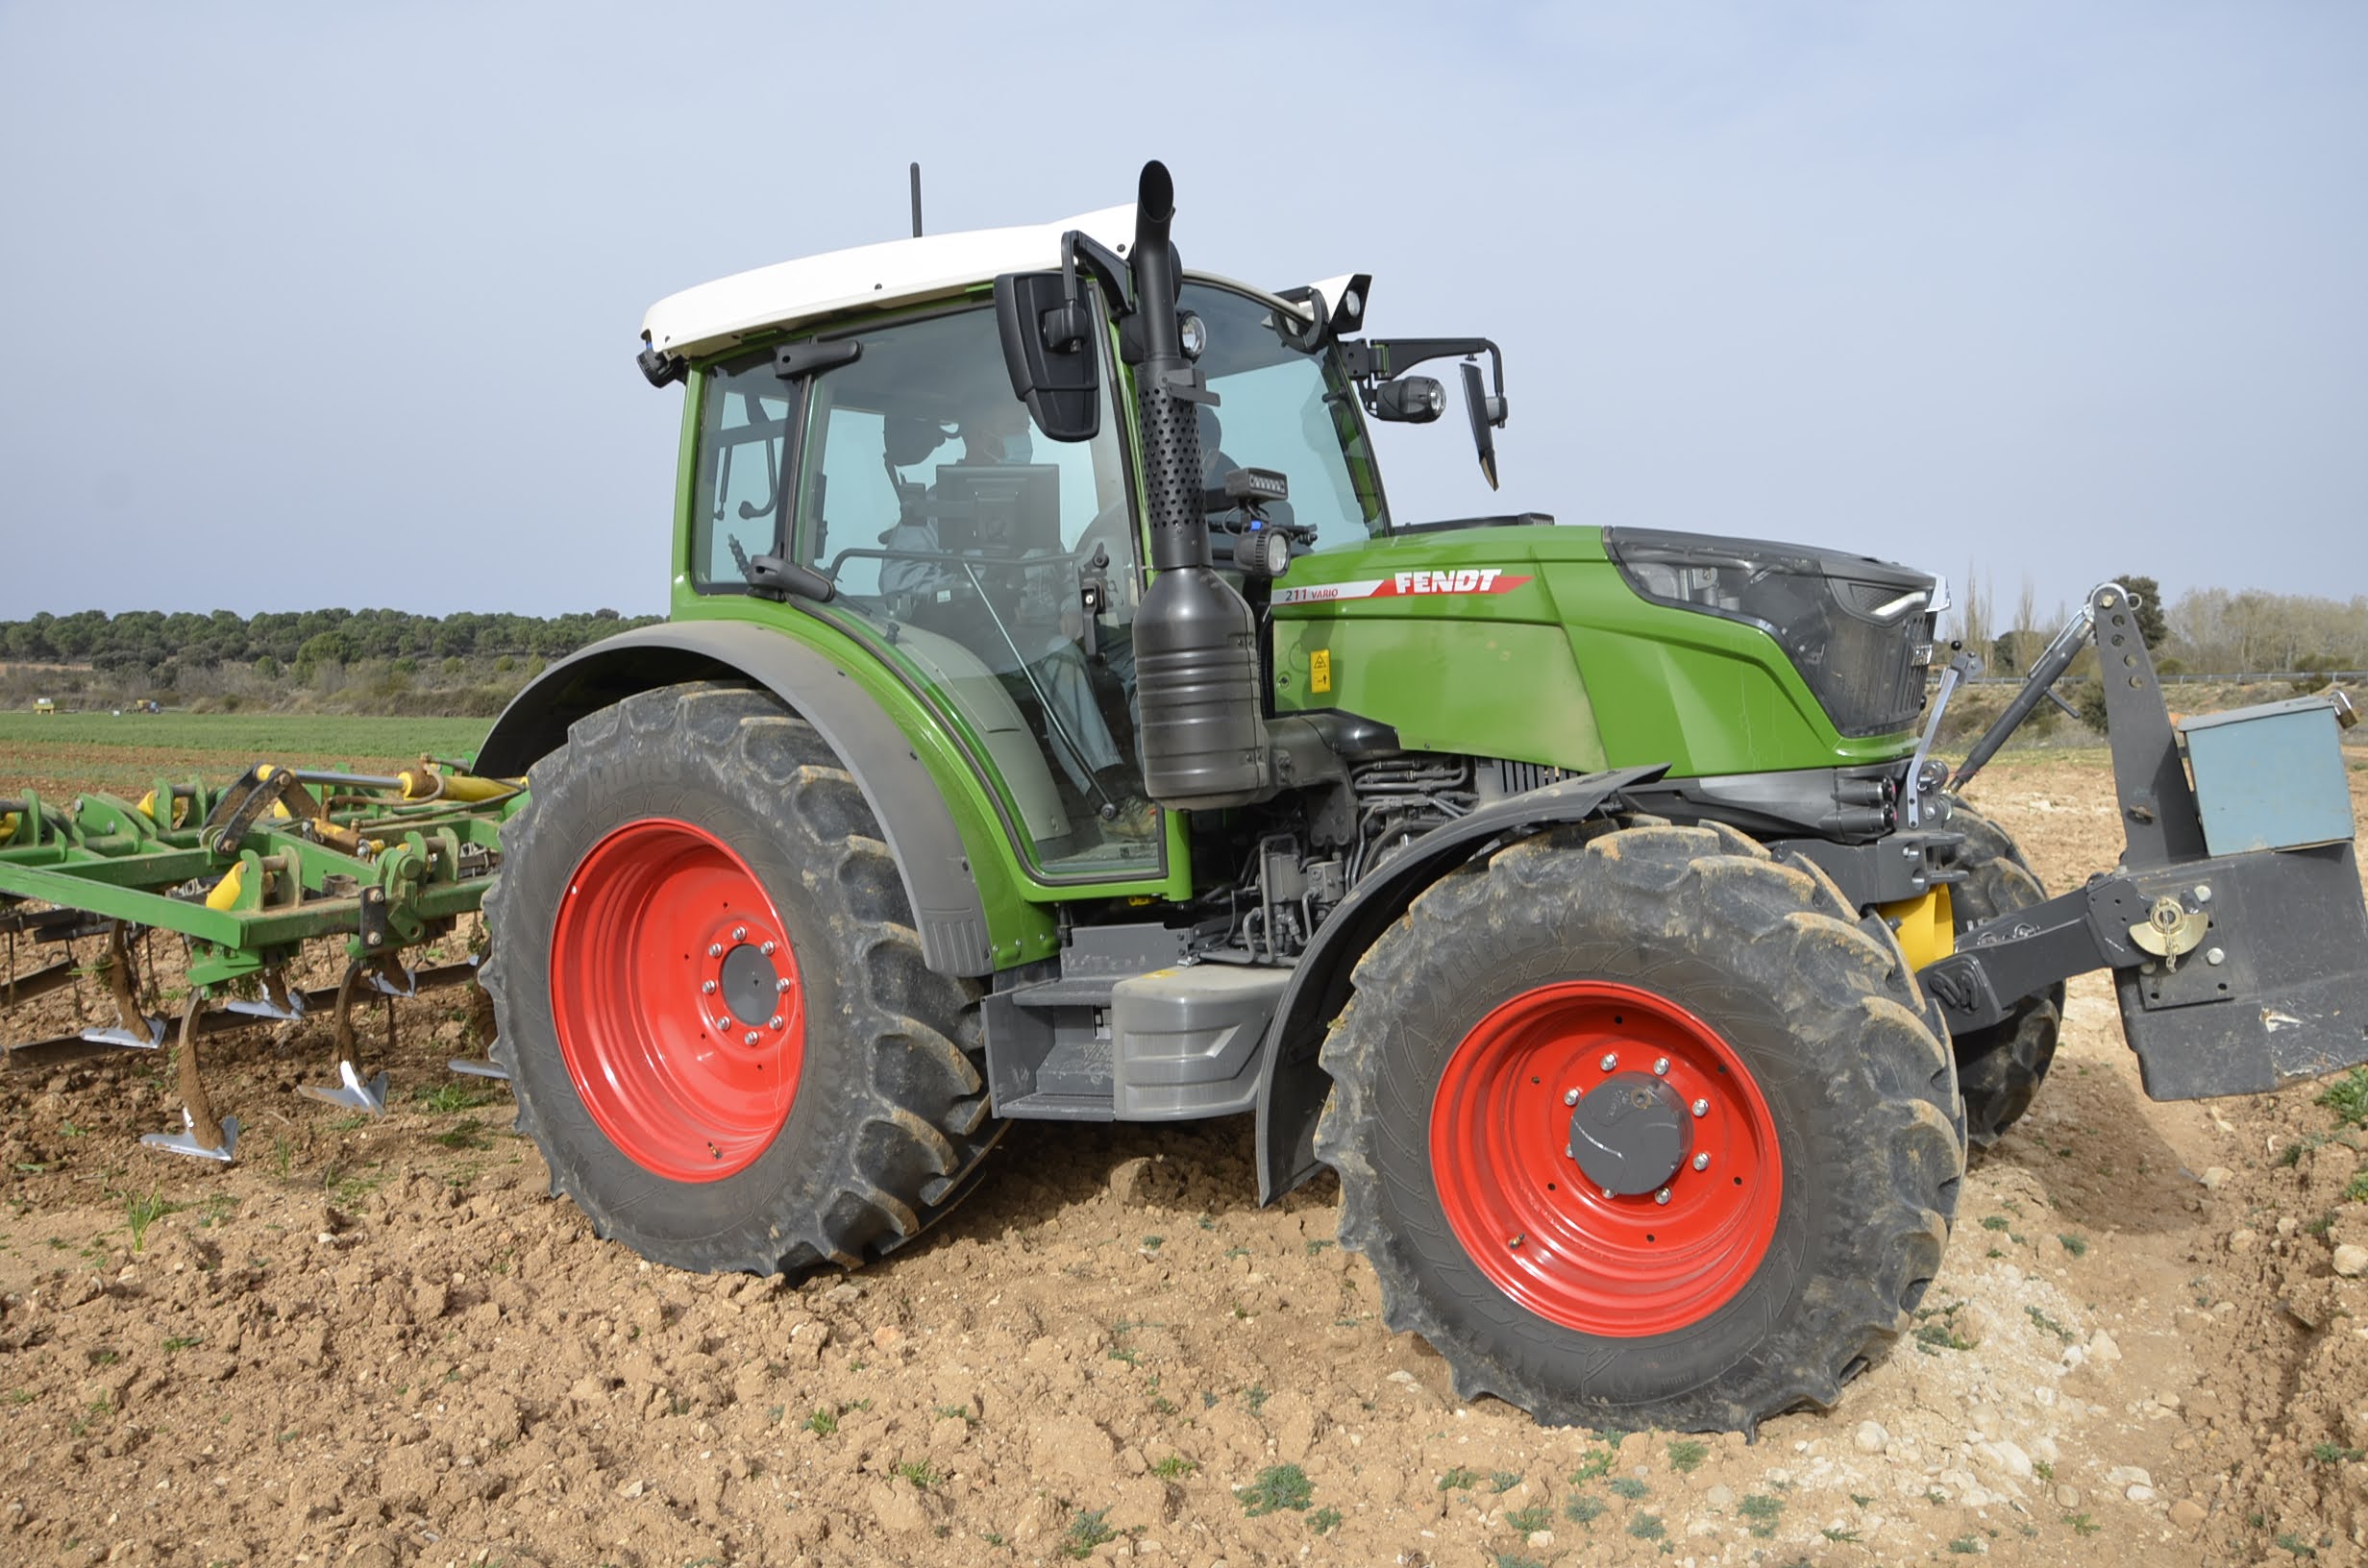 Twins' Farm. Blog about farming: New Fendt 211 The special one